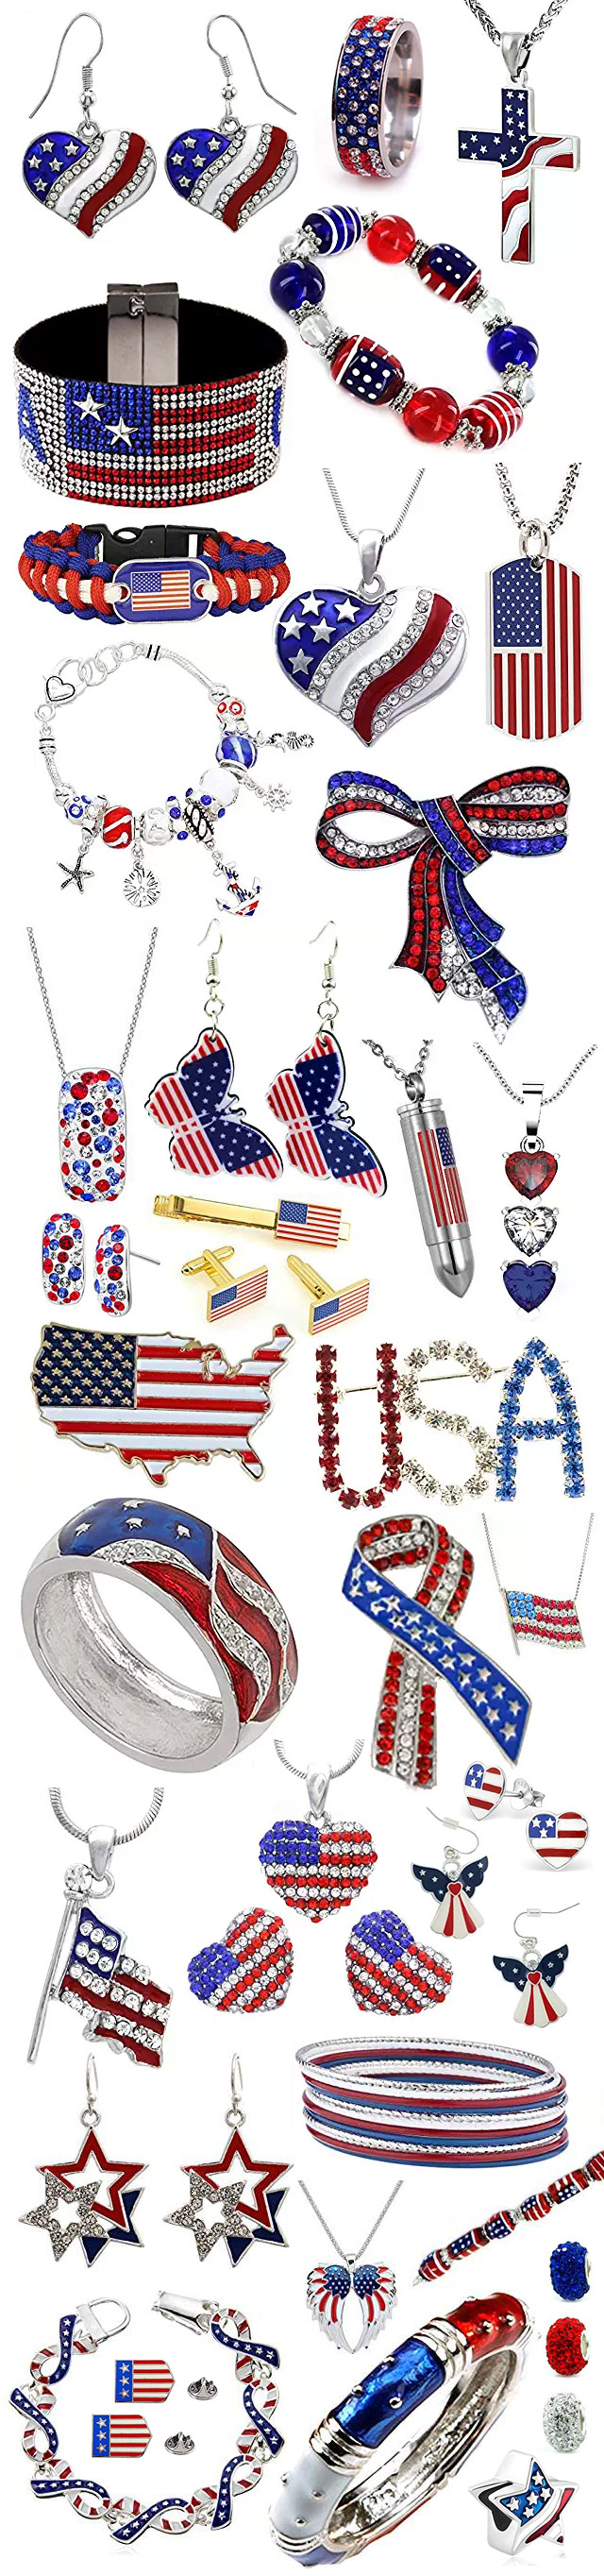 Red White Blue Patriotic July 4th Jewelry